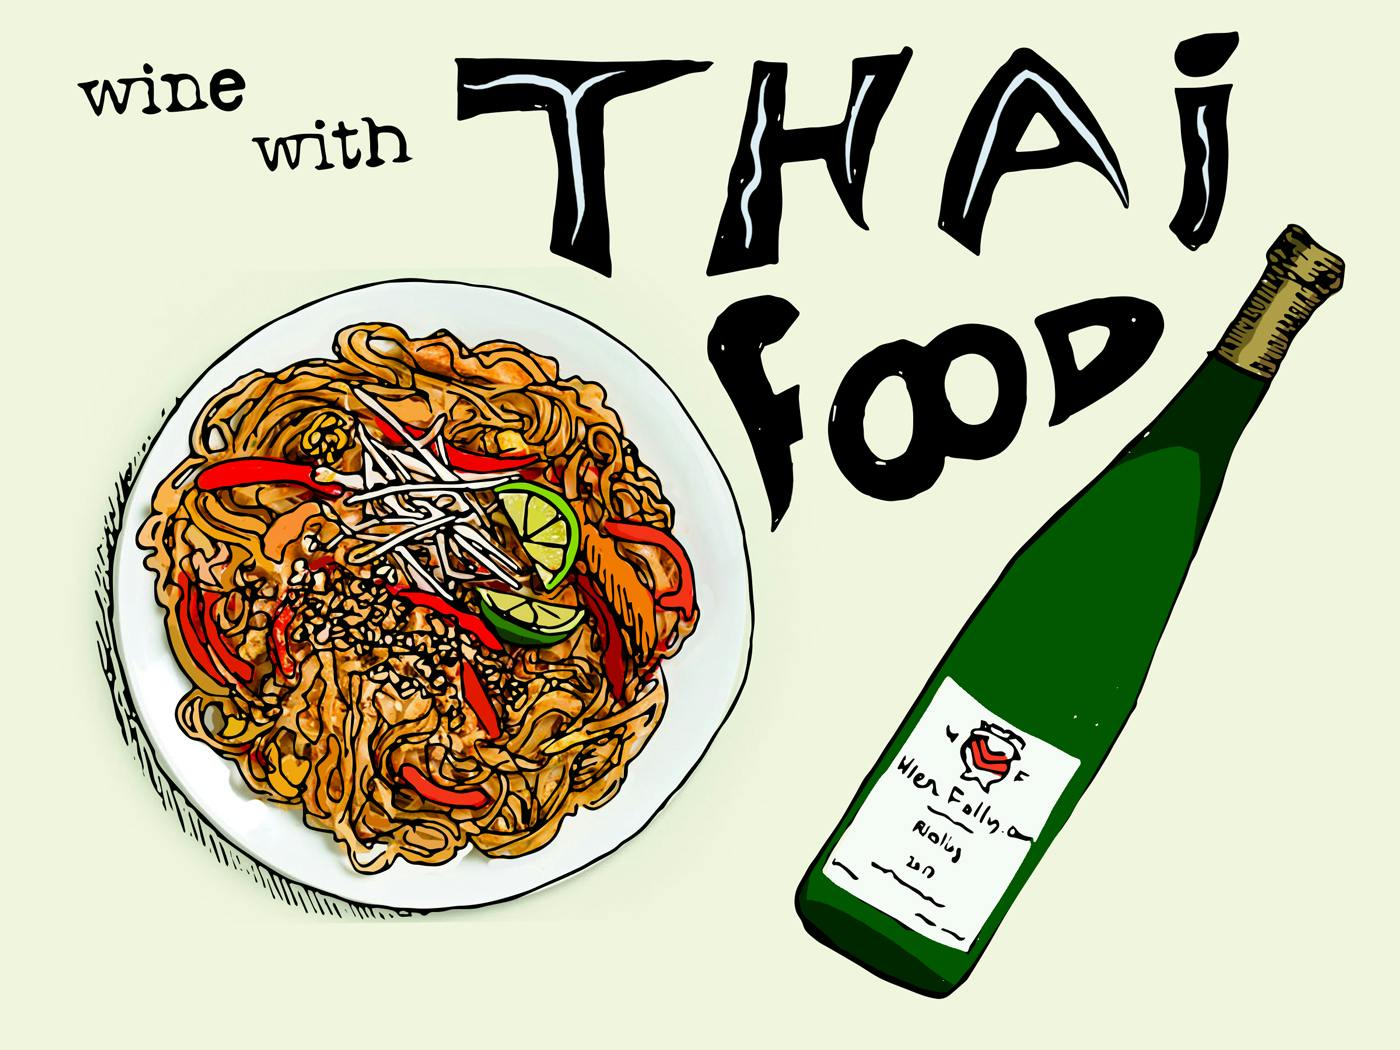 Cover Image for Our Advice on Pairing Wine With Thai Food